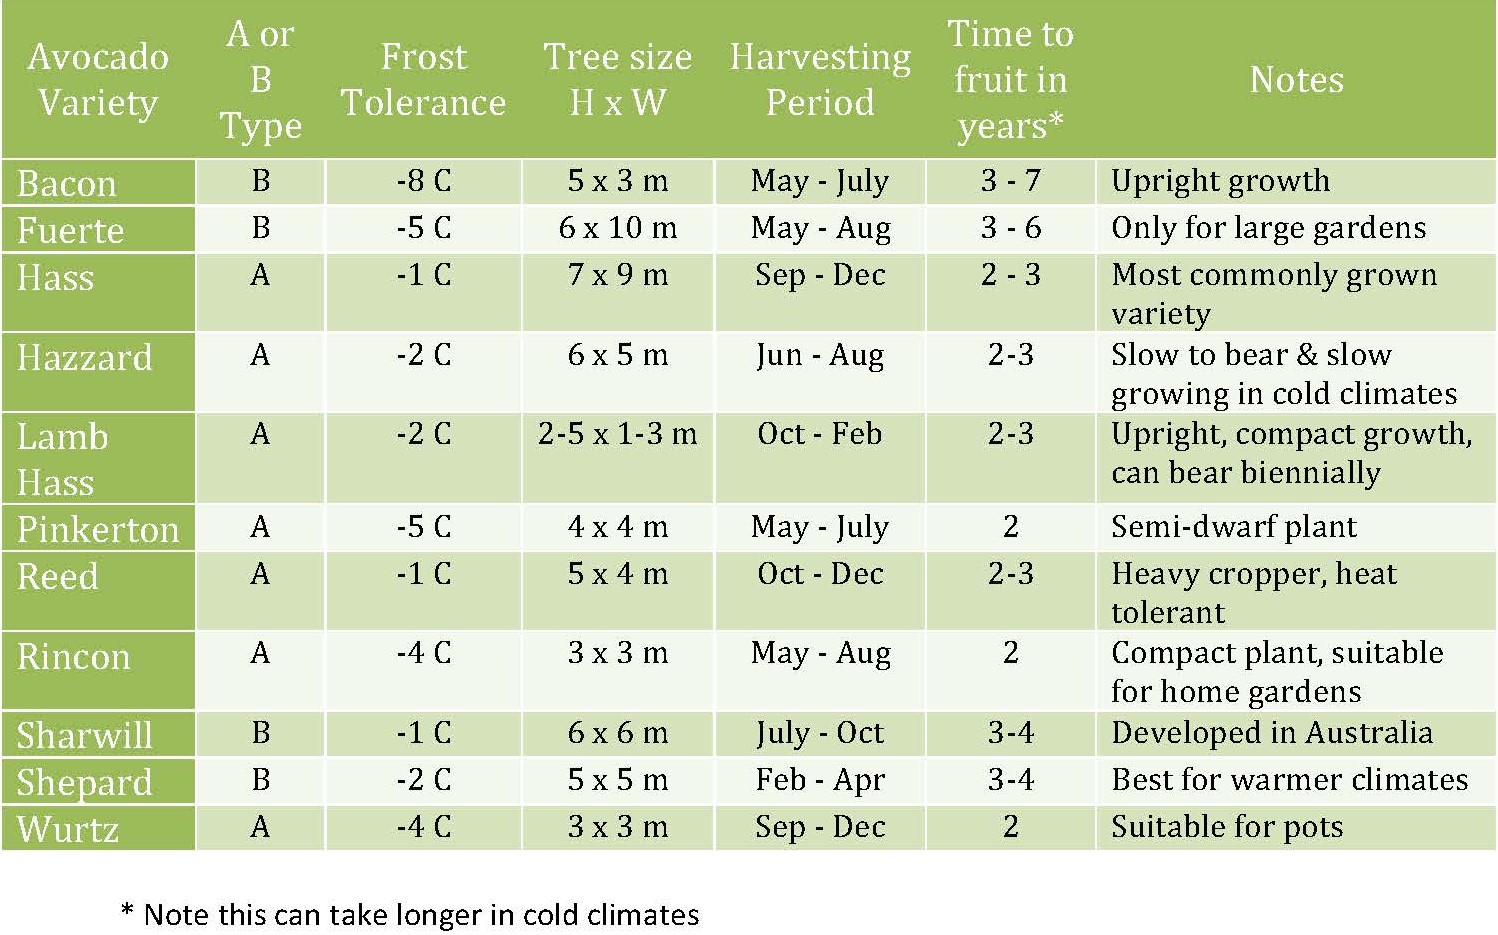 Avocado varieties to grow in Melbourne, a cool climate area